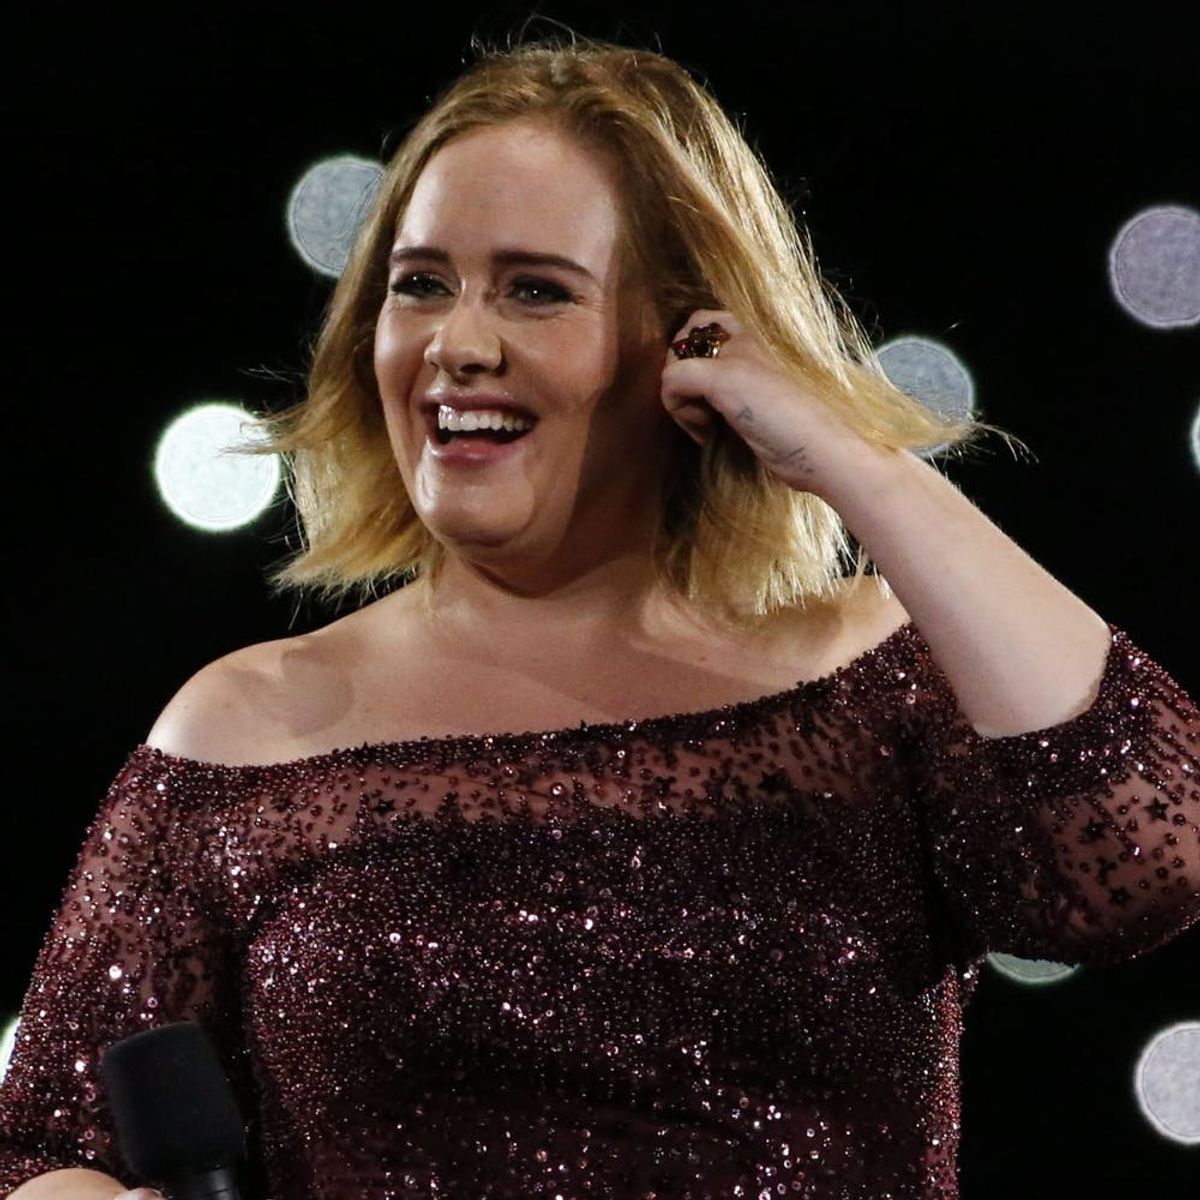 Adele Had a ‘Titanic’-Themed Party for Her 30th Birthday